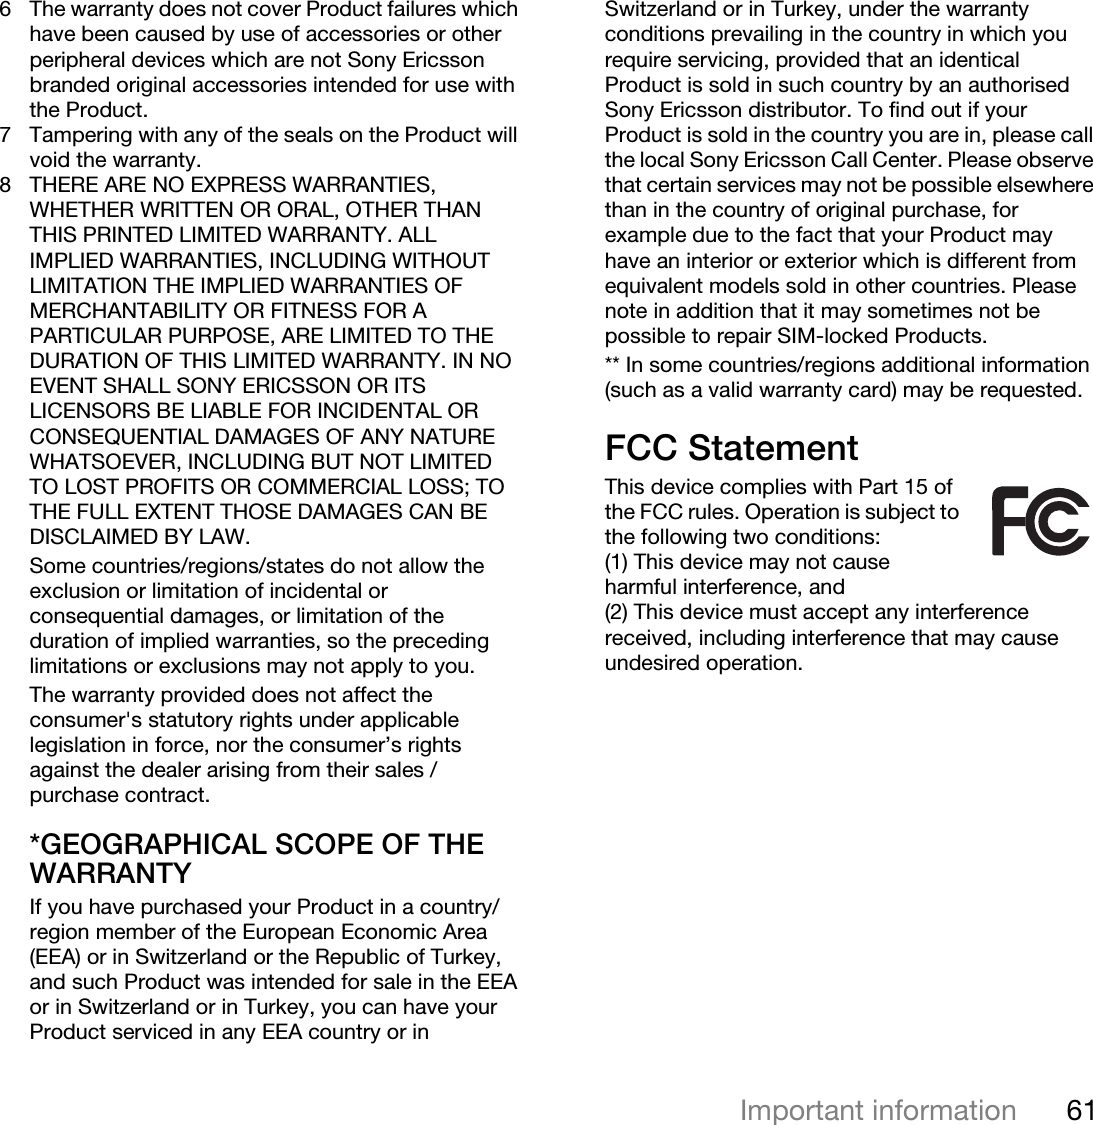 61Important informationThis is the Internet version of the user&apos;s guide. © Print only for private use.6 The warranty does not cover Product failures which have been caused by use of accessories or other peripheral devices which are not Sony Ericsson branded original accessories intended for use with the Product.7 Tampering with any of the seals on the Product will void the warranty.8 THERE ARE NO EXPRESS WARRANTIES, WHETHER WRITTEN OR ORAL, OTHER THAN THIS PRINTED LIMITED WARRANTY. ALL IMPLIED WARRANTIES, INCLUDING WITHOUT LIMITATION THE IMPLIED WARRANTIES OF MERCHANTABILITY OR FITNESS FOR A PARTICULAR PURPOSE, ARE LIMITED TO THE DURATION OF THIS LIMITED WARRANTY. IN NO EVENT SHALL SONY ERICSSON OR ITS LICENSORS BE LIABLE FOR INCIDENTAL OR CONSEQUENTIAL DAMAGES OF ANY NATURE WHATSOEVER, INCLUDING BUT NOT LIMITED TO LOST PROFITS OR COMMERCIAL LOSS; TO THE FULL EXTENT THOSE DAMAGES CAN BE DISCLAIMED BY LAW. Some countries/regions/states do not allow the exclusion or limitation of incidental or consequential damages, or limitation of the duration of implied warranties, so the preceding limitations or exclusions may not apply to you. The warranty provided does not affect the consumer&apos;s statutory rights under applicable legislation in force, nor the consumer’s rights against the dealer arising from their sales / purchase contract.*GEOGRAPHICAL SCOPE OF THE WARRANTYIf you have purchased your Product in a country/region member of the European Economic Area (EEA) or in Switzerland or the Republic of Turkey, and such Product was intended for sale in the EEA or in Switzerland or in Turkey, you can have your Product serviced in any EEA country or in Switzerland or in Turkey, under the warranty conditions prevailing in the country in which you require servicing, provided that an identical Product is sold in such country by an authorised Sony Ericsson distributor. To find out if your Product is sold in the country you are in, please call the local Sony Ericsson Call Center. Please observe that certain services may not be possible elsewhere than in the country of original purchase, for example due to the fact that your Product may have an interior or exterior which is different from equivalent models sold in other countries. Please note in addition that it may sometimes not be possible to repair SIM-locked Products.** In some countries/regions additional information (such as a valid warranty card) may be requested.FCC StatementThis device complies with Part 15 of the FCC rules. Operation is subject to the following two conditions:(1) This device may not cause harmful interference, and(2) This device must accept any interference received, including interference that may cause undesired operation.